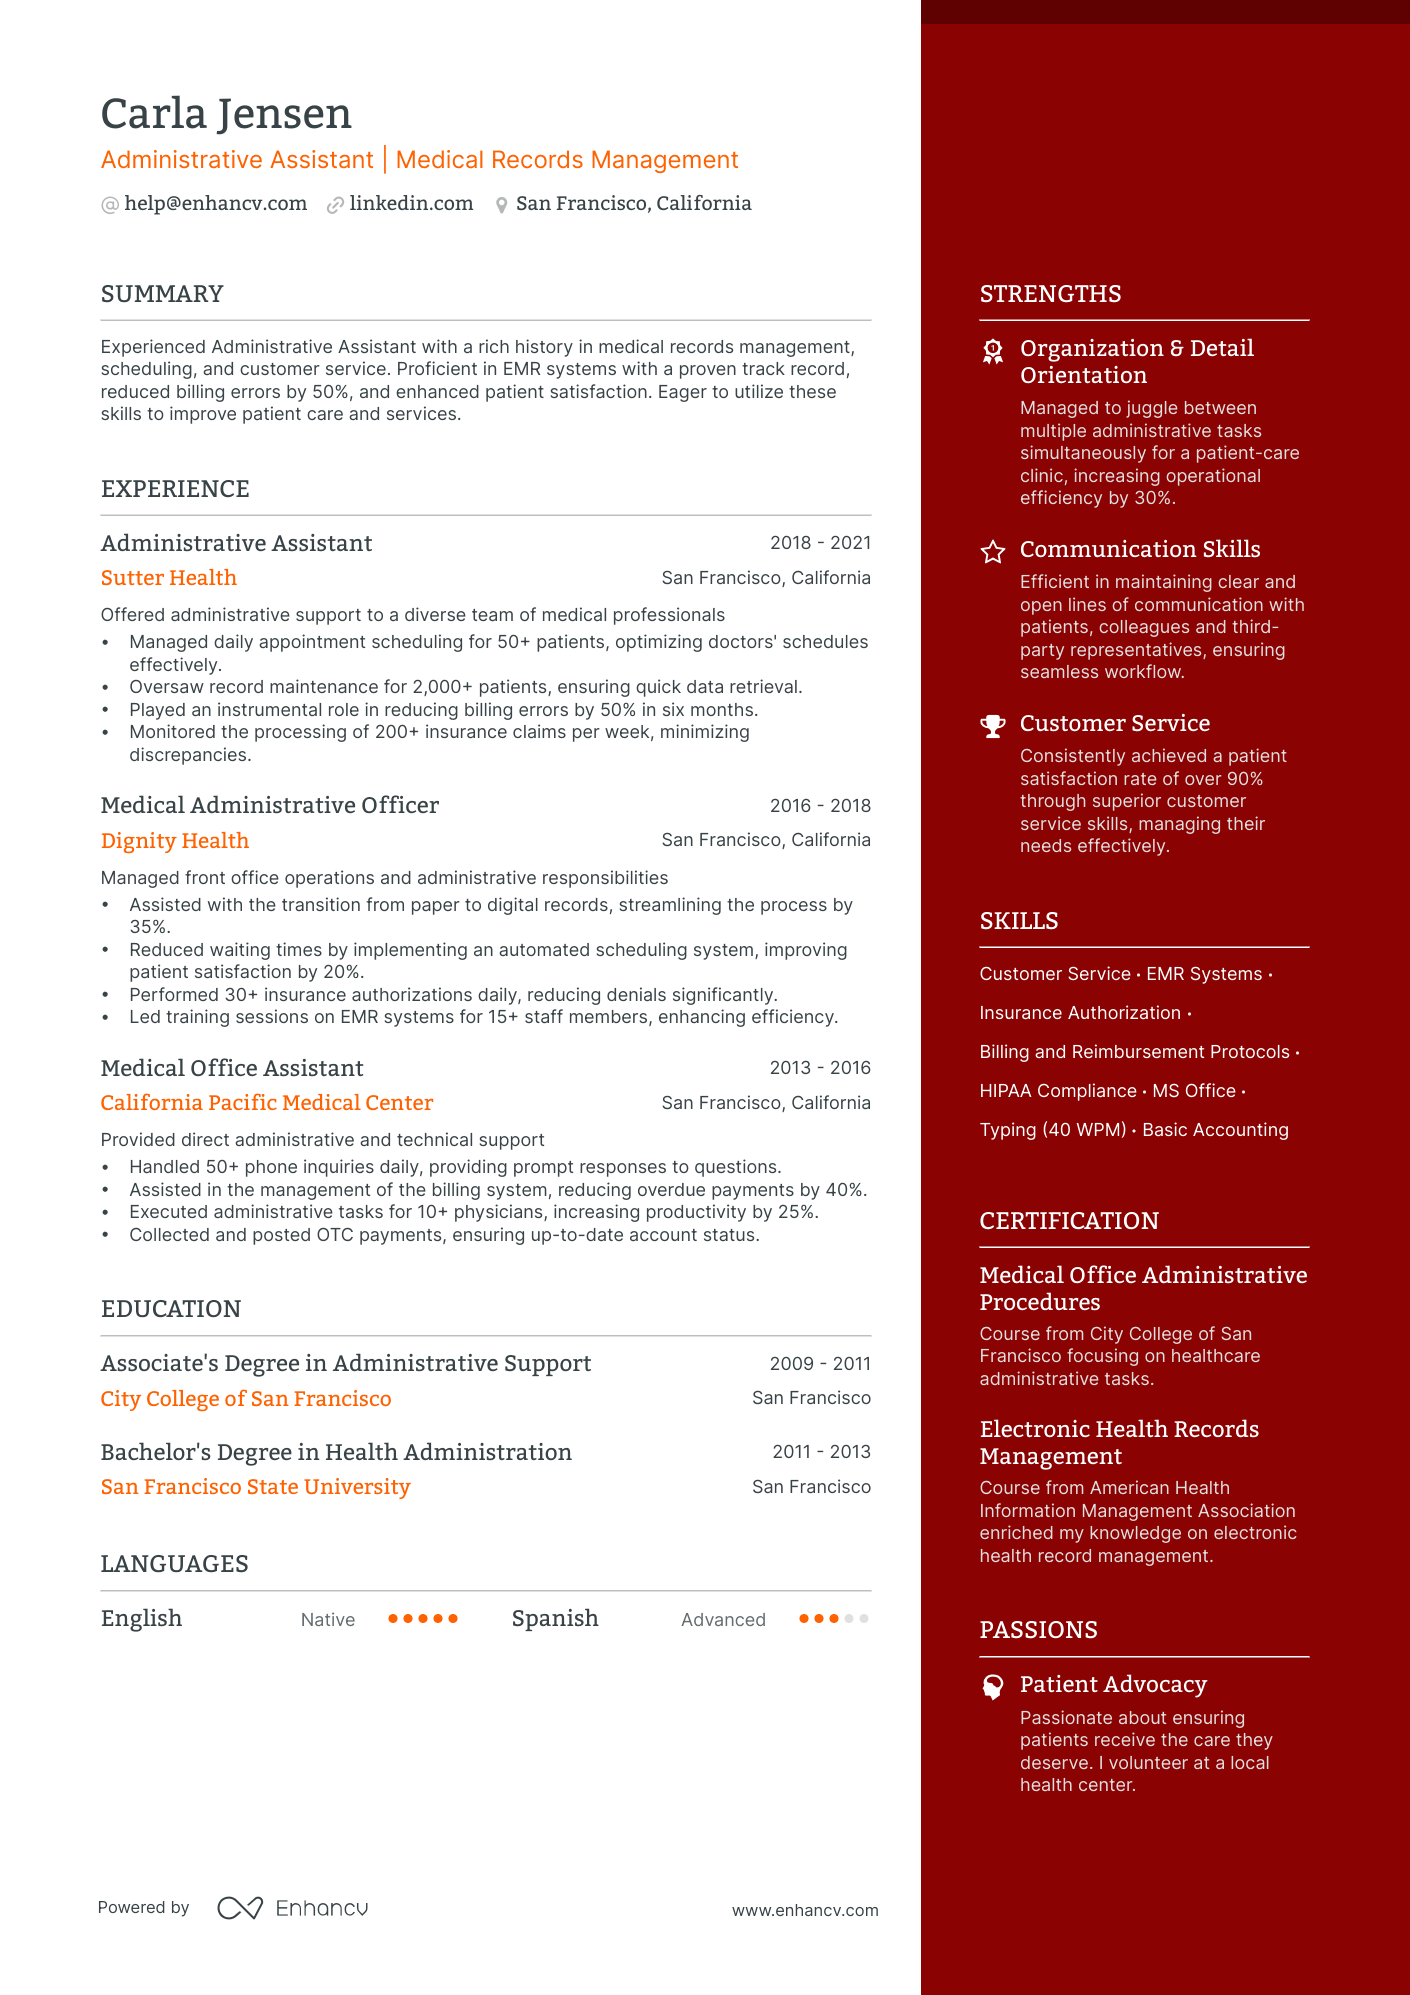 resume format for office administrator